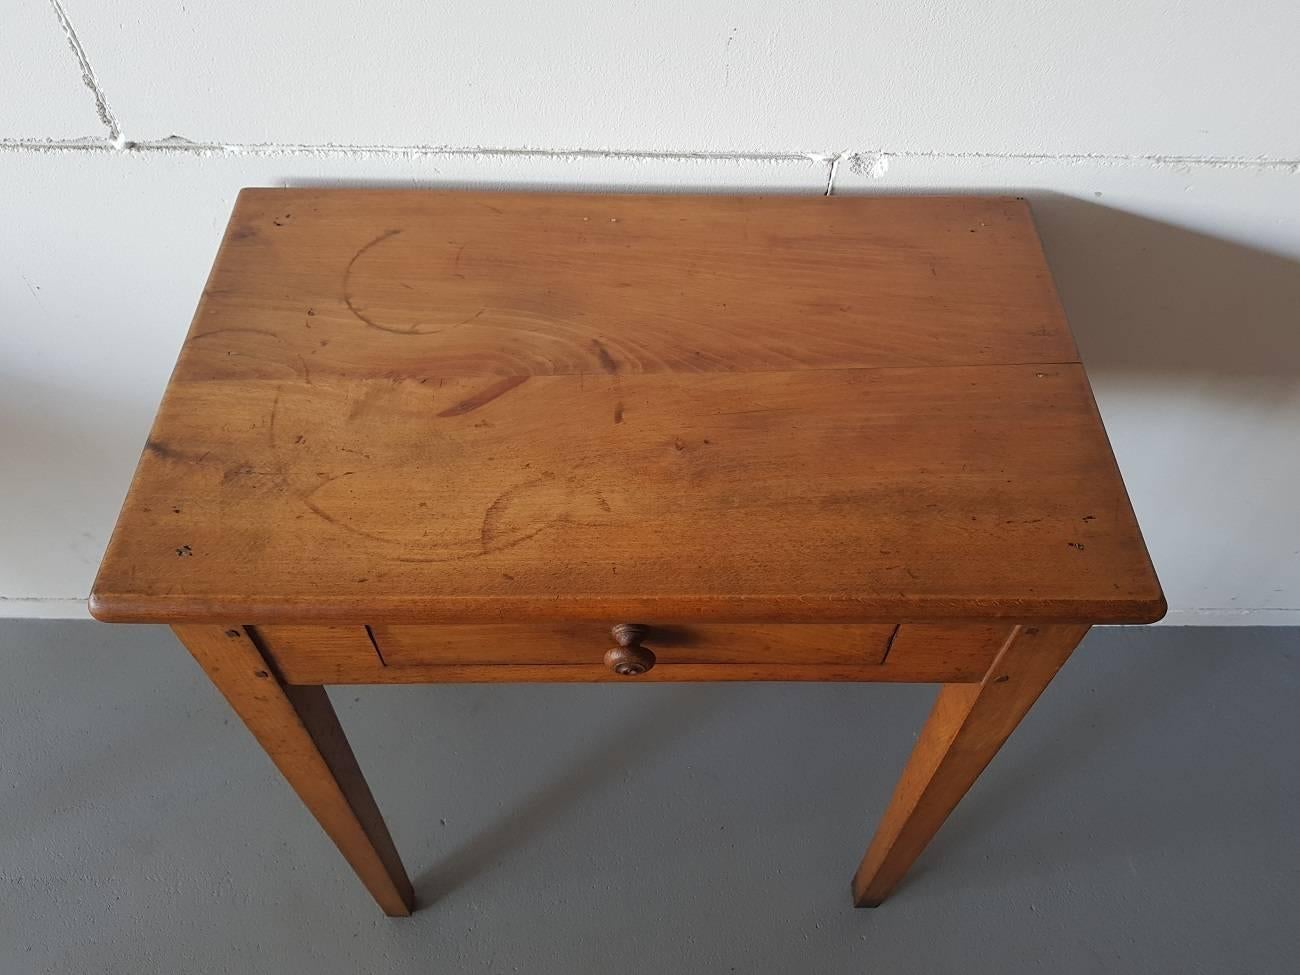 Nice and adorable French vintage wooden table from the first half of the 20th century with a drawer and pinned connections all around.

The measurements are,
Depth 34 cm/ 13.3 inch.
Width 56.5 cm/ 22.2 inch.
Height 68 cm/ 26.7 inch.
 